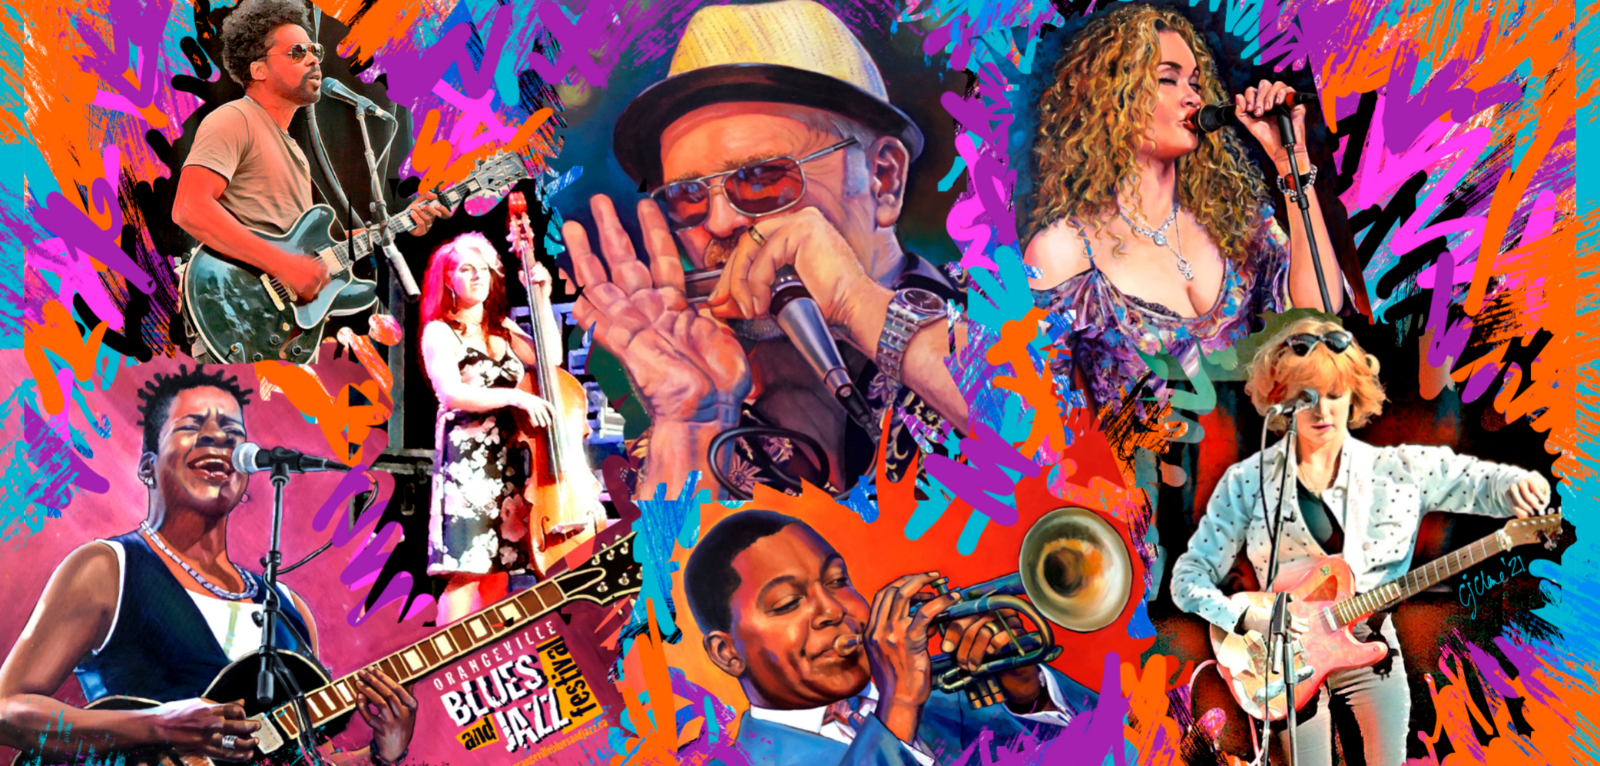 Collage of musicians and bright artistic elements